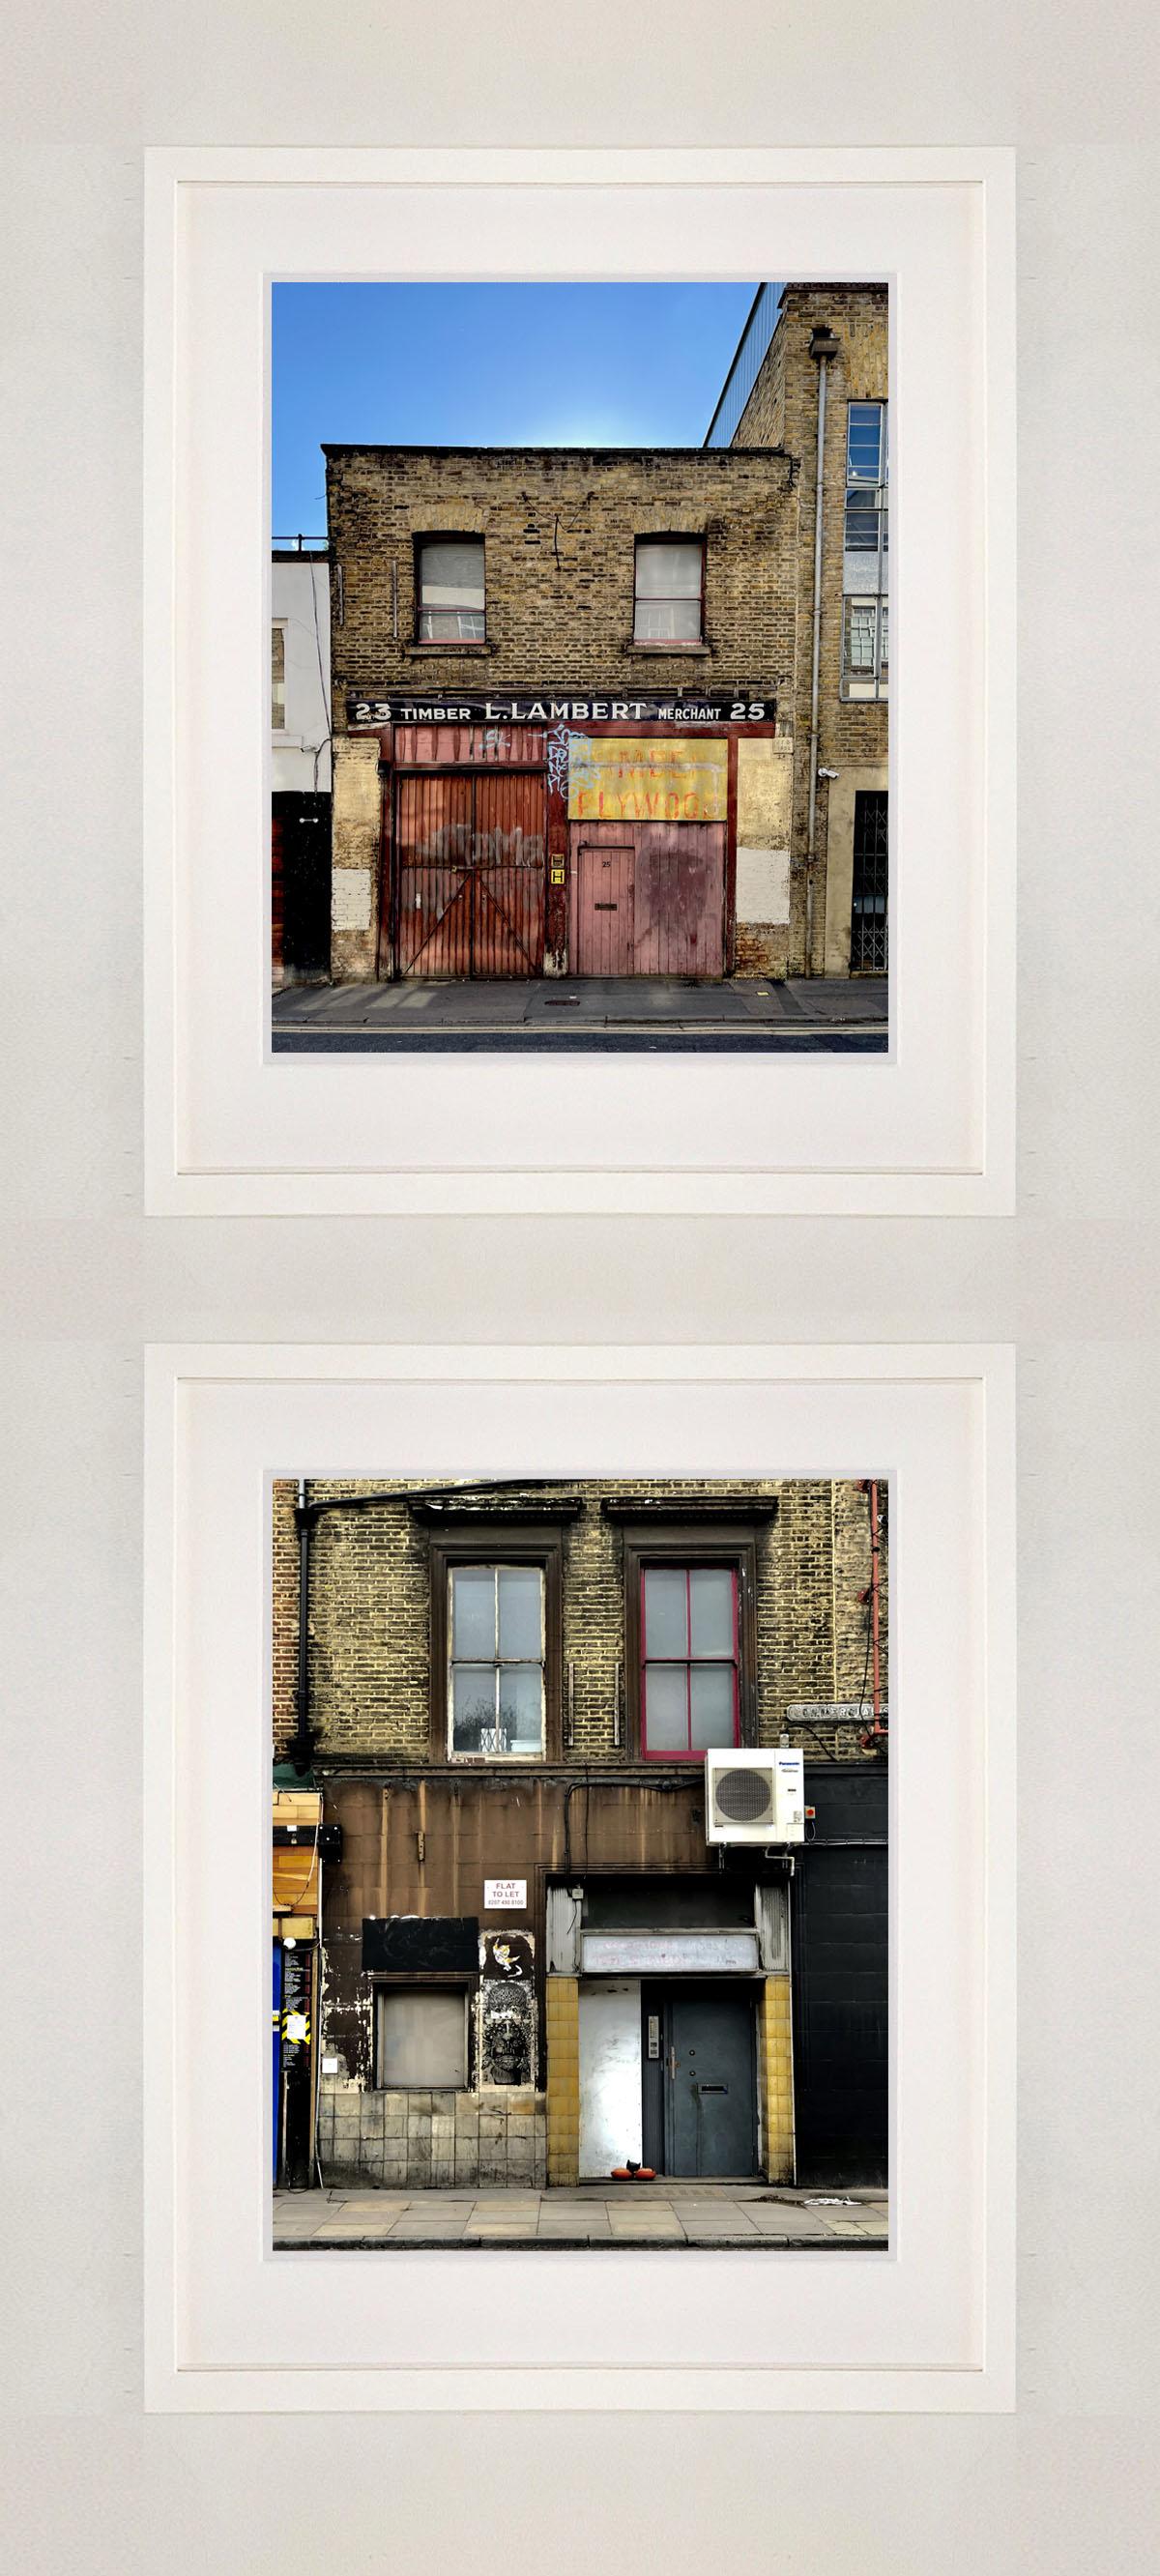 Flat to Let, London - East London architecture street photography - Black Print by Richard Heeps